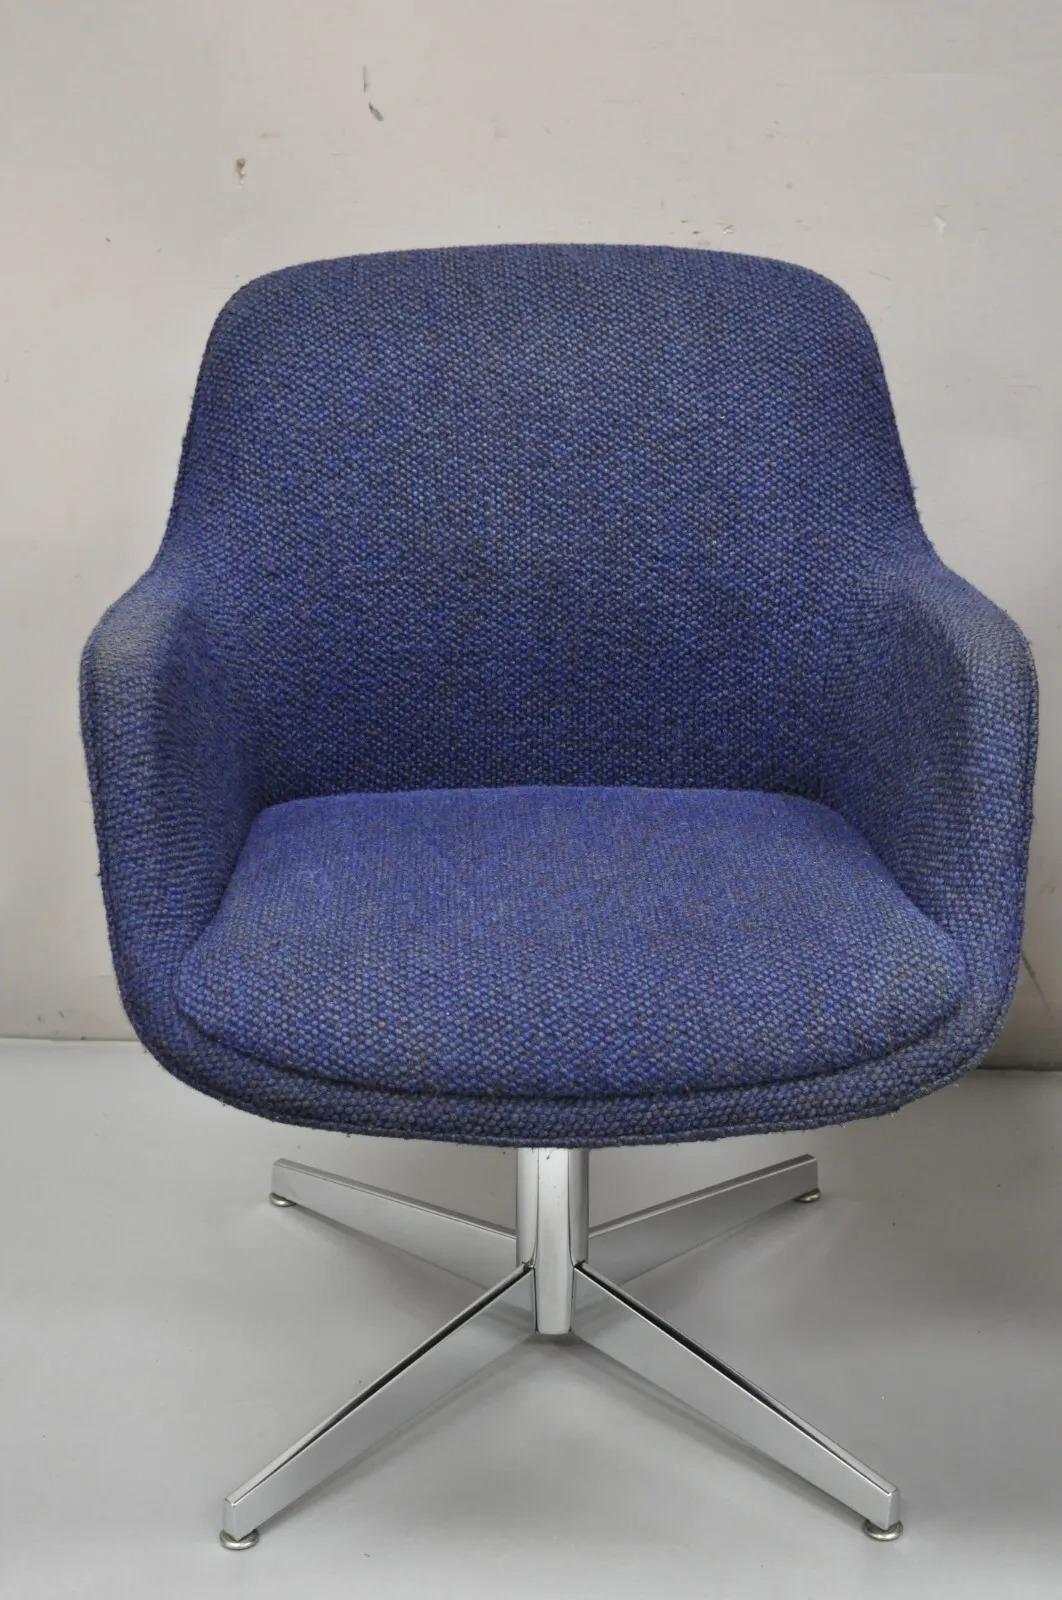 20th Century Vintage Mid Century Modern Blue Upholstered Chrome Swivel Base Club Chair - Pair For Sale